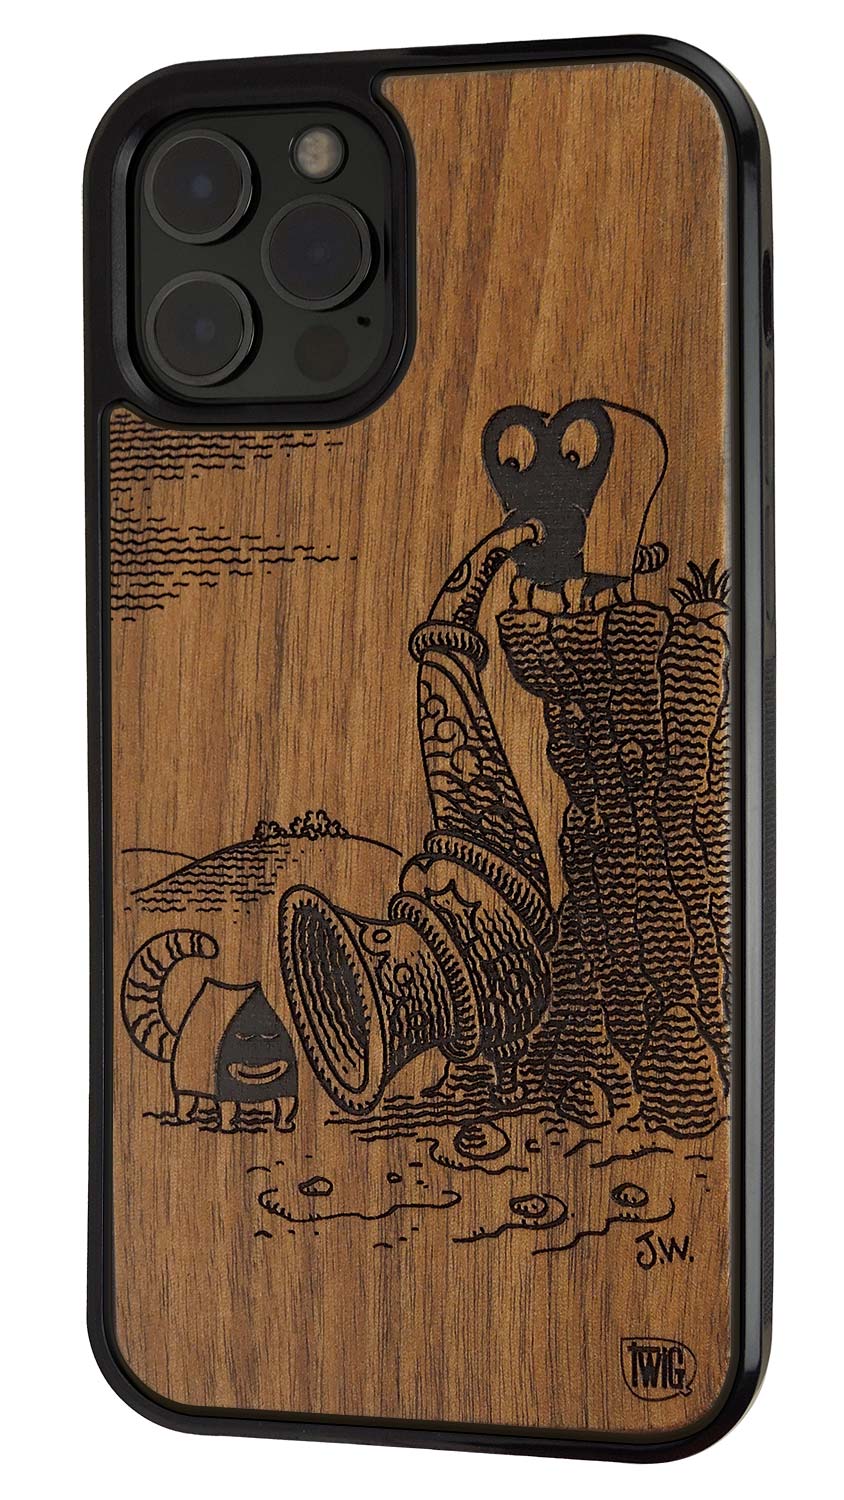 I Will Destroy You - Walnut iPhone Case, iPhone Case - Twig Case Co.